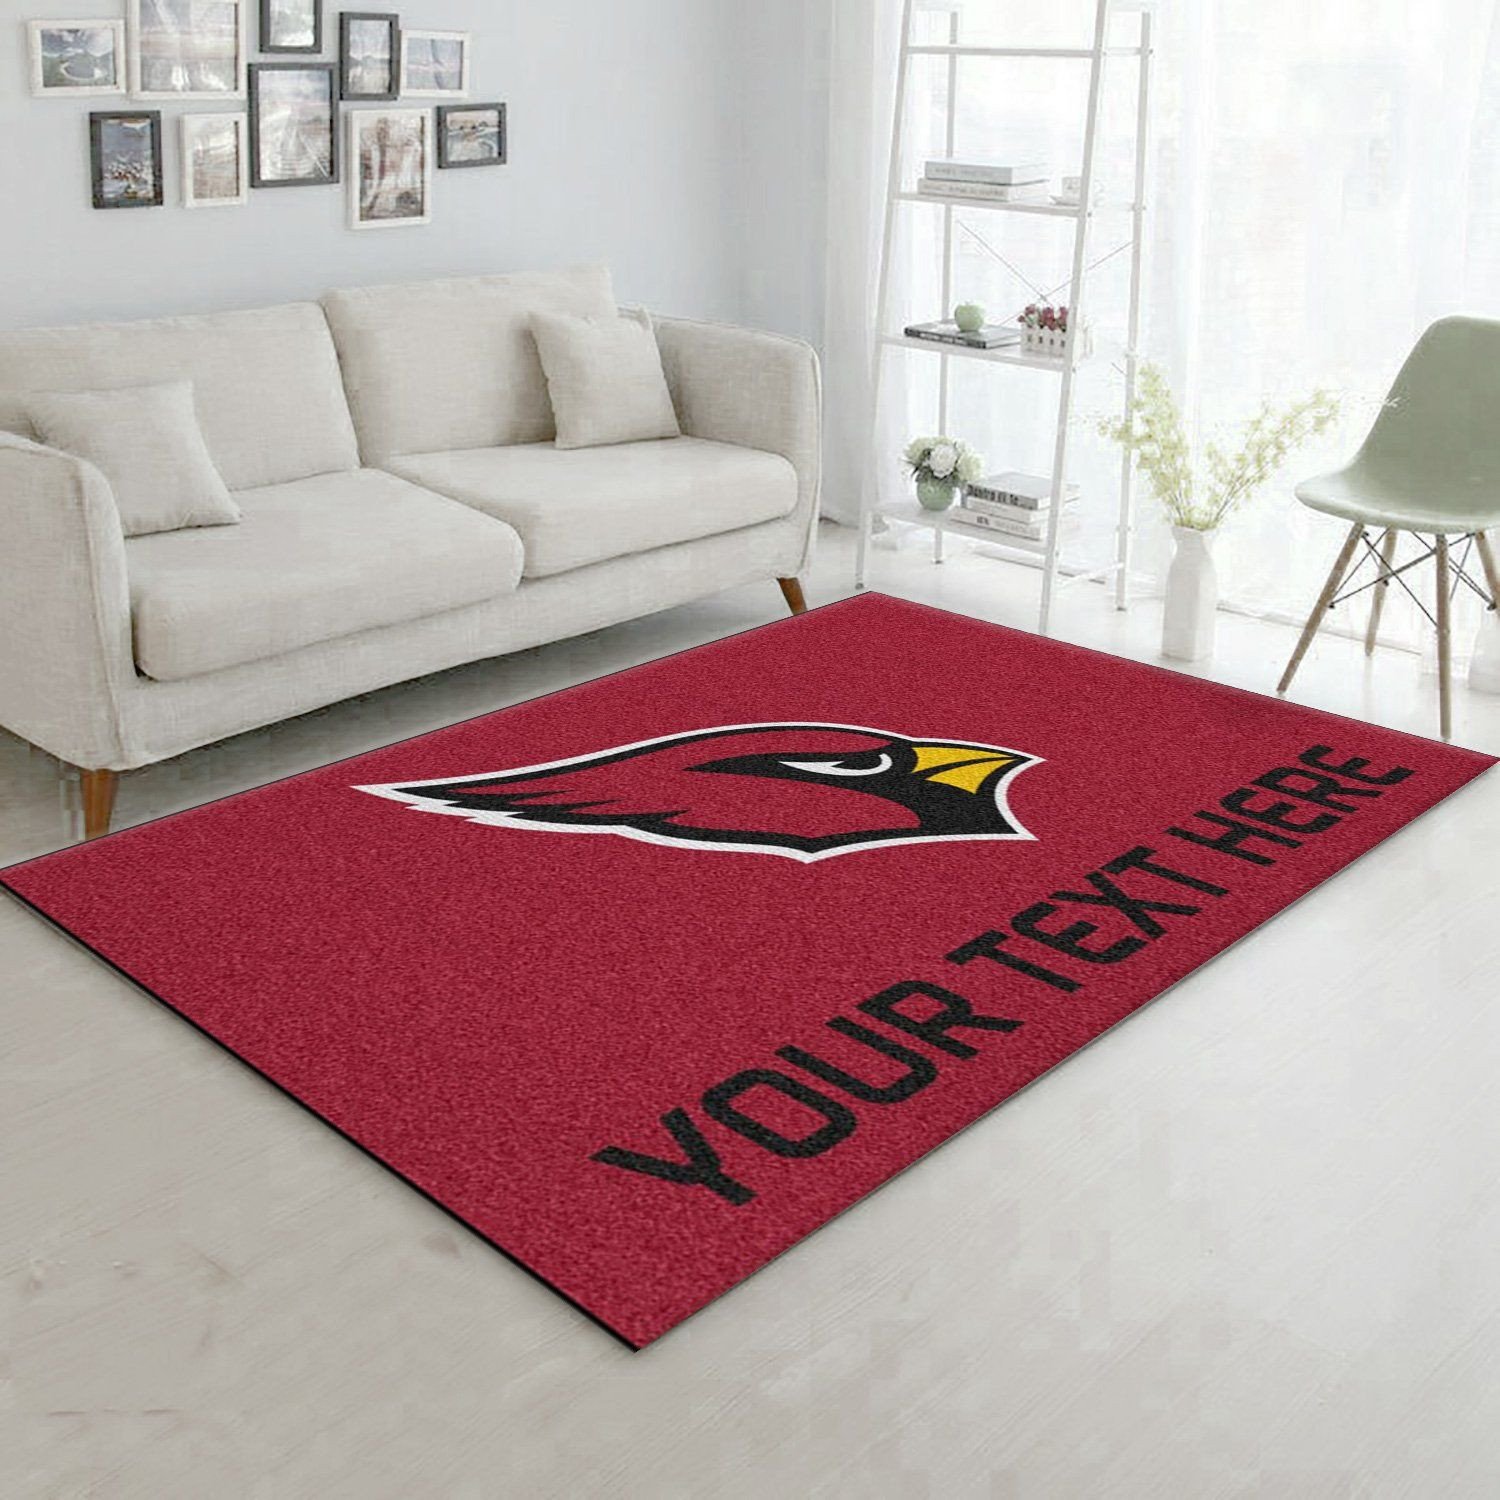 Customizable Arizona Cardinals Personalized Accent Rug NFL Area Rug For Christmas, Living Room Rug, Christmas Gift US Decor - Indoor Outdoor Rugs 3